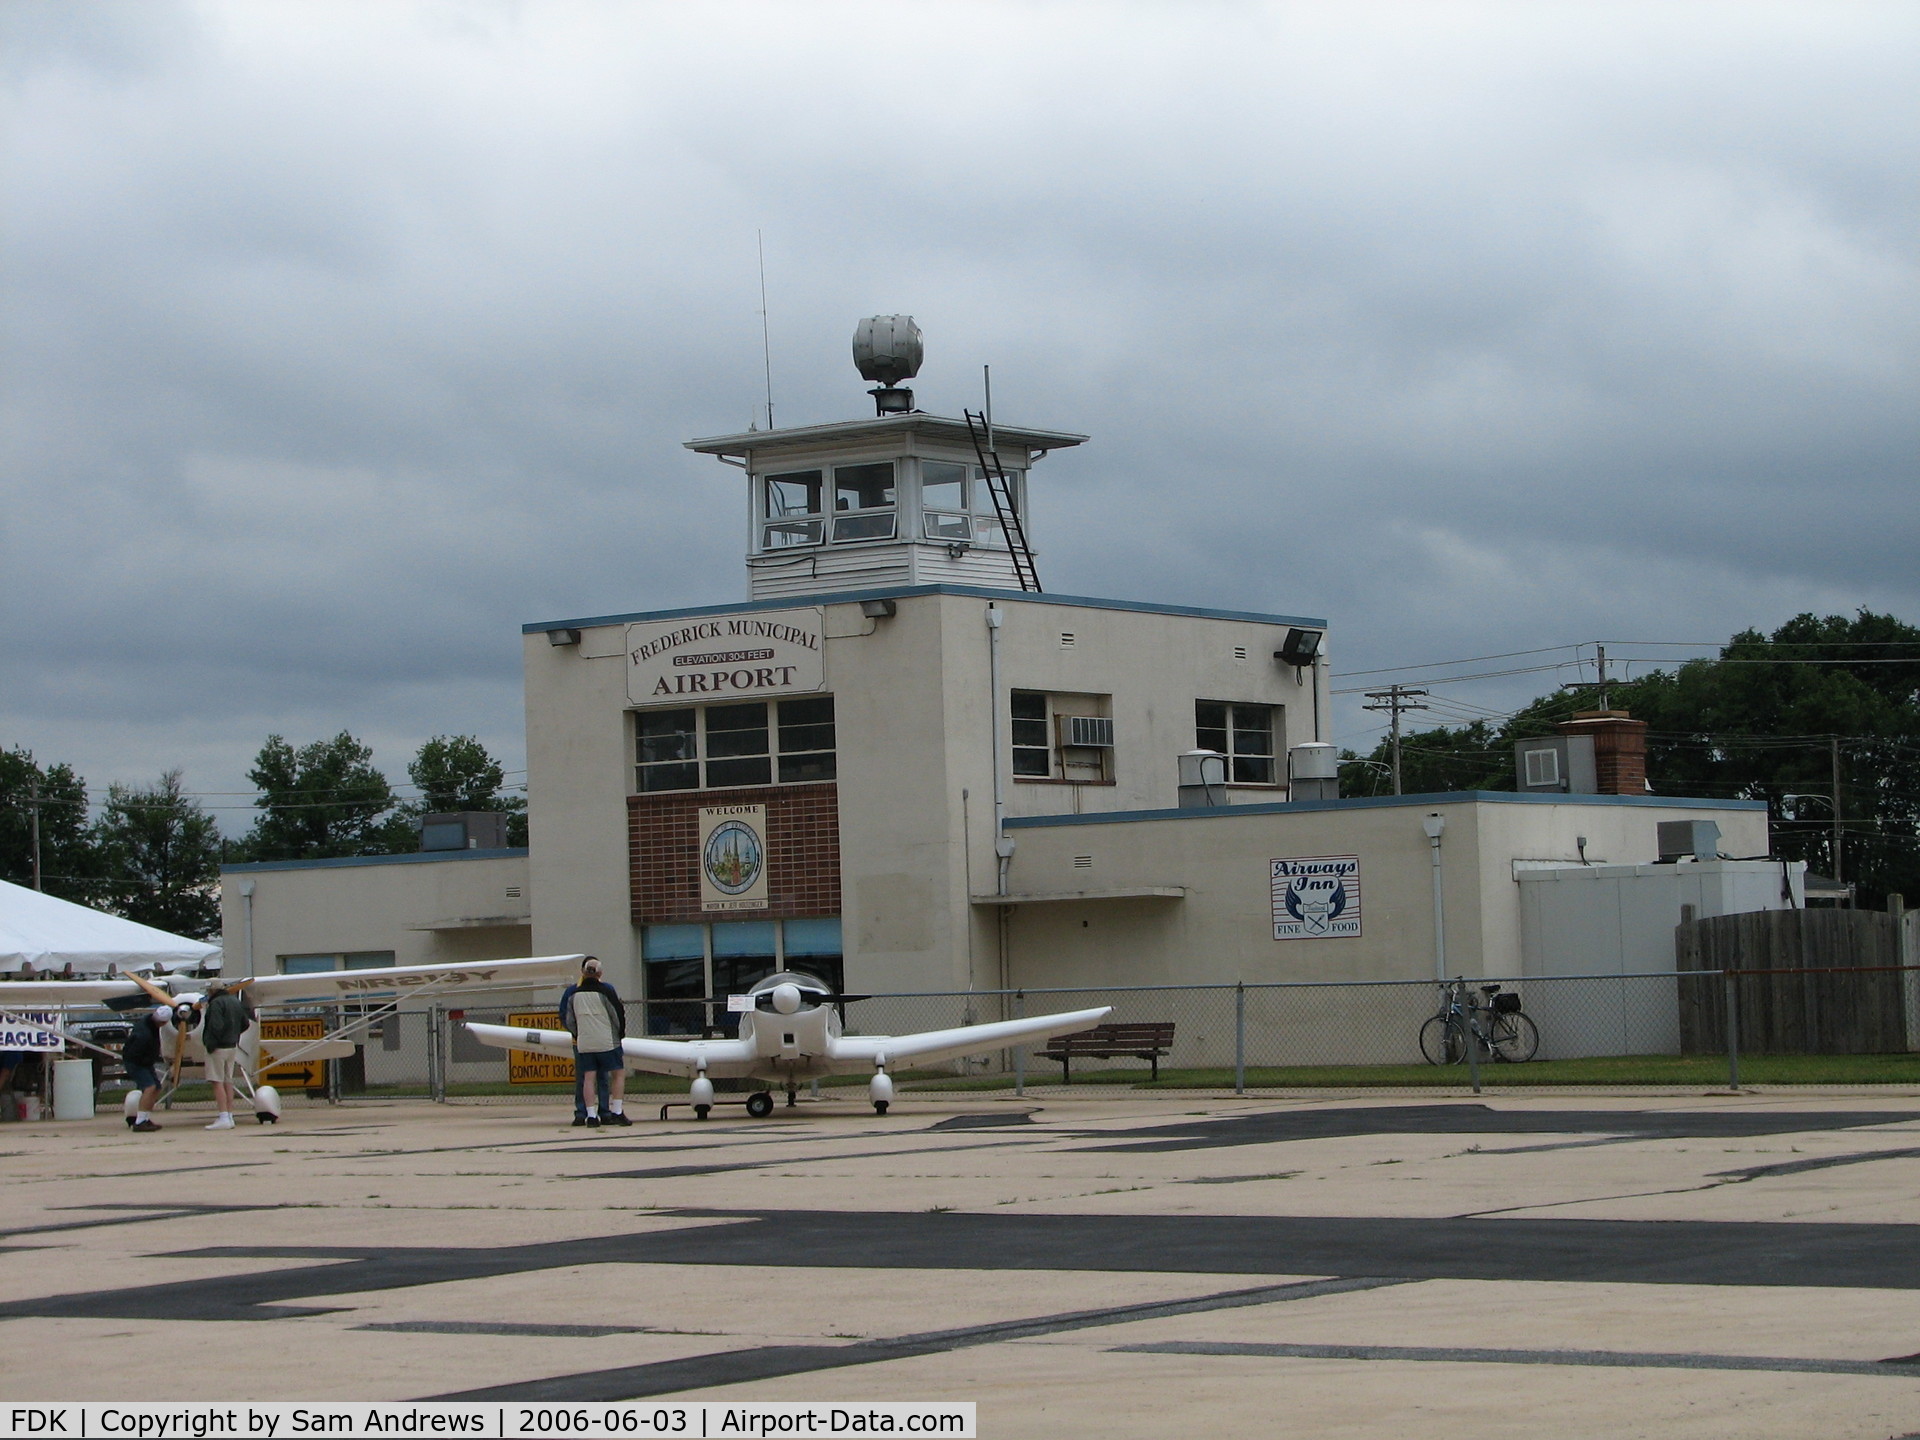 Frederick Municipal Airport (FDK) - The old tower at Frederick